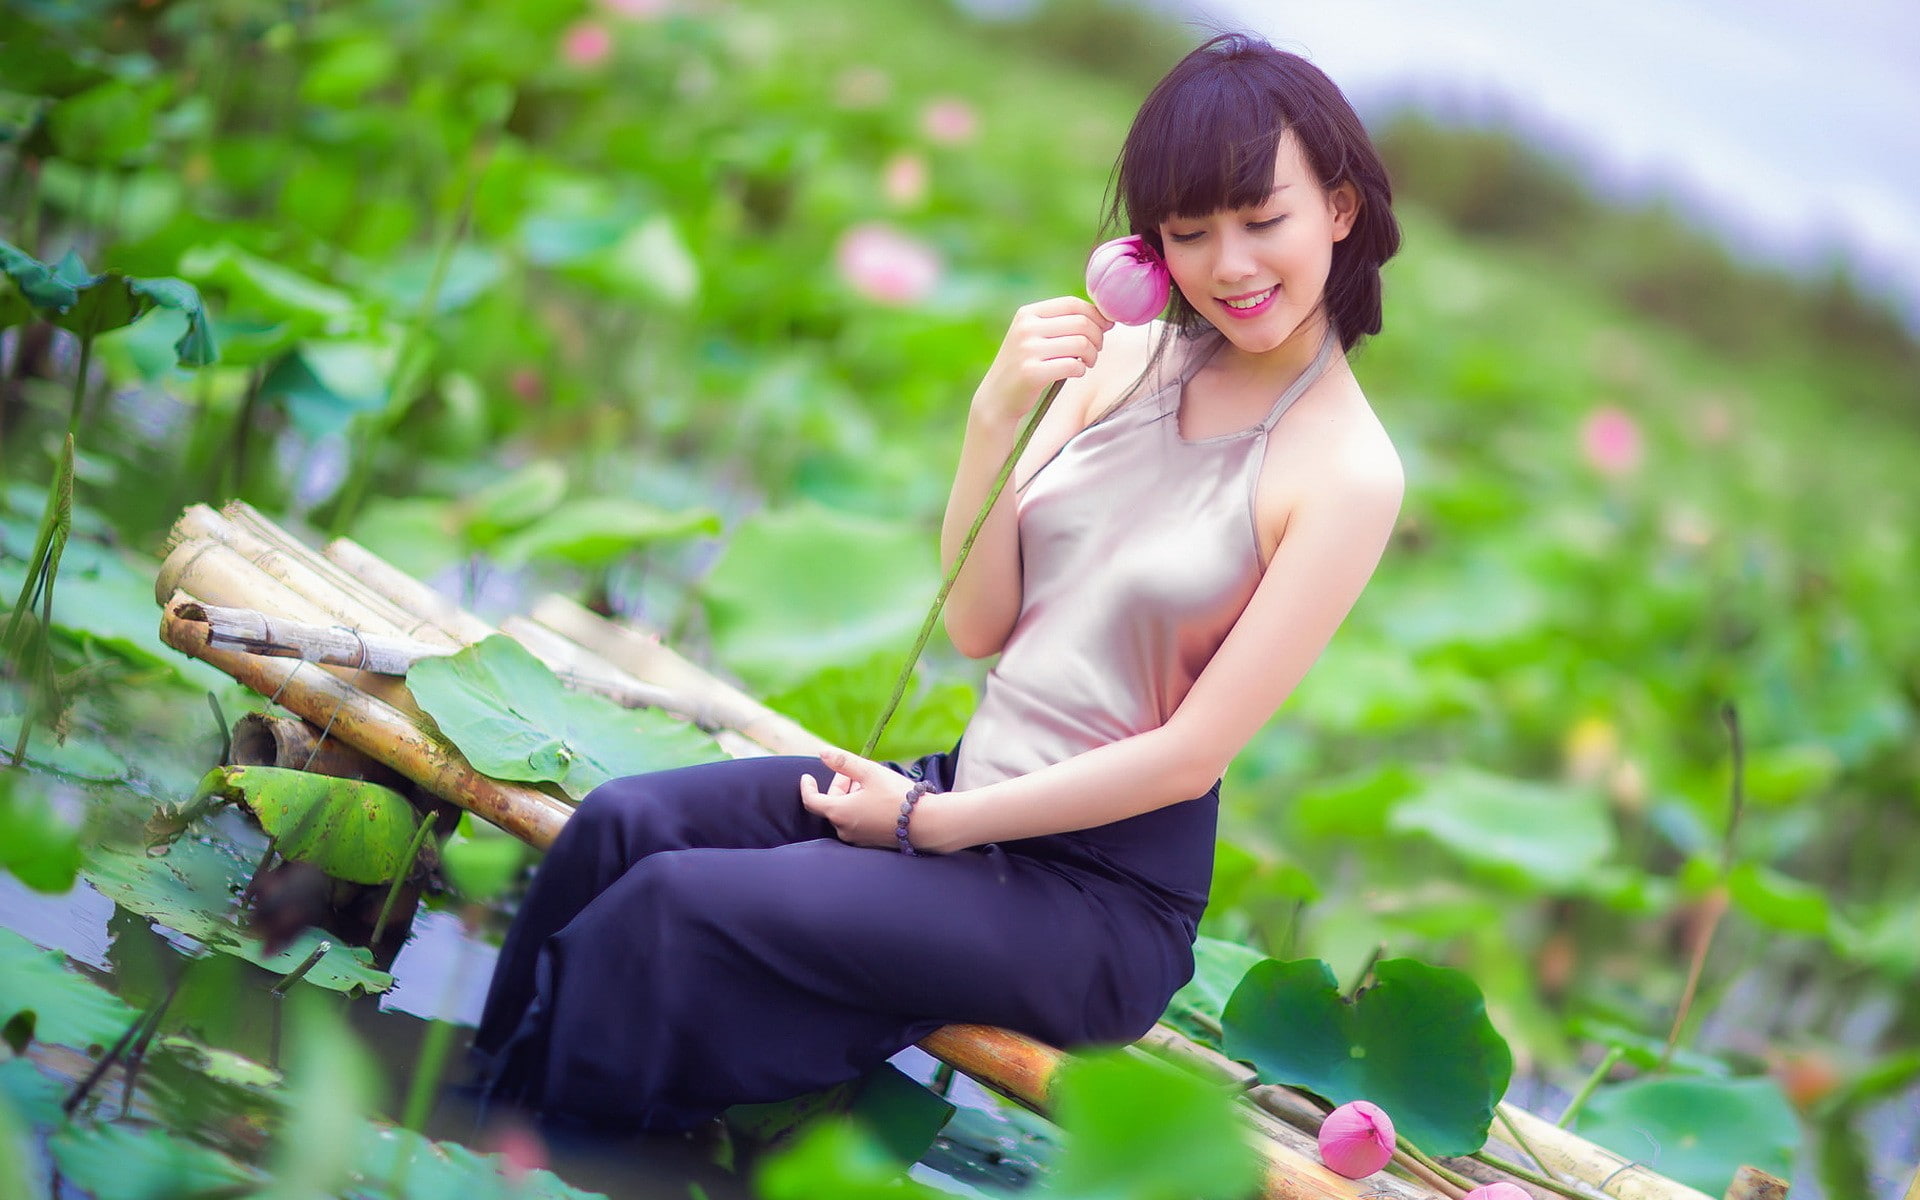 women outdoors, Asian, model, smiling, young adult, one person